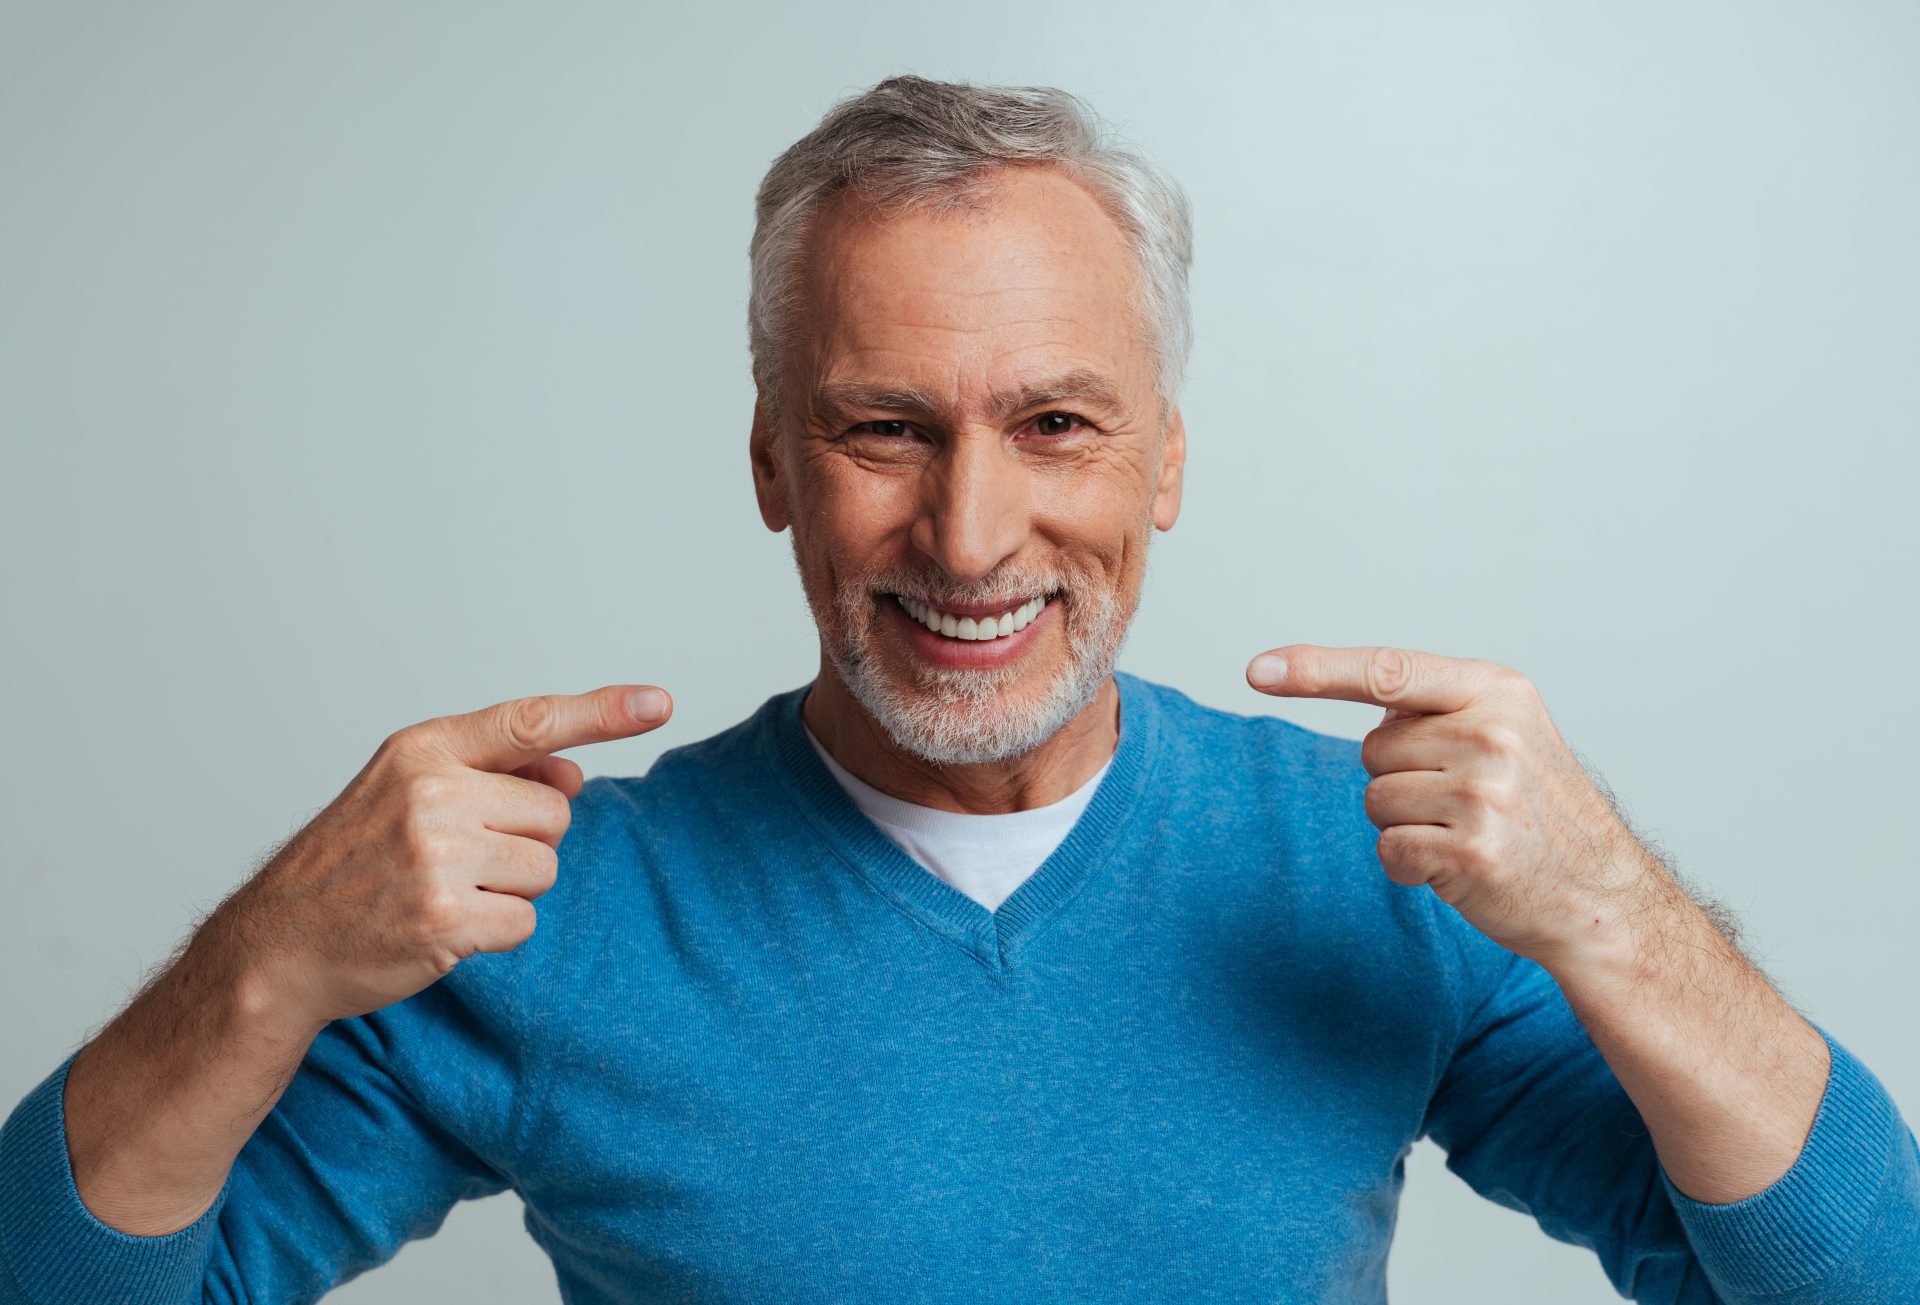 Implant Supported Dentures in Alamogordo NM Dr. Westover Dr. Slade Dr. Griffin Dr. Peterson. Mountain View Dental General, Cosmetic, Restorative, Preventative Dentist in Alamogordo, NM 88310